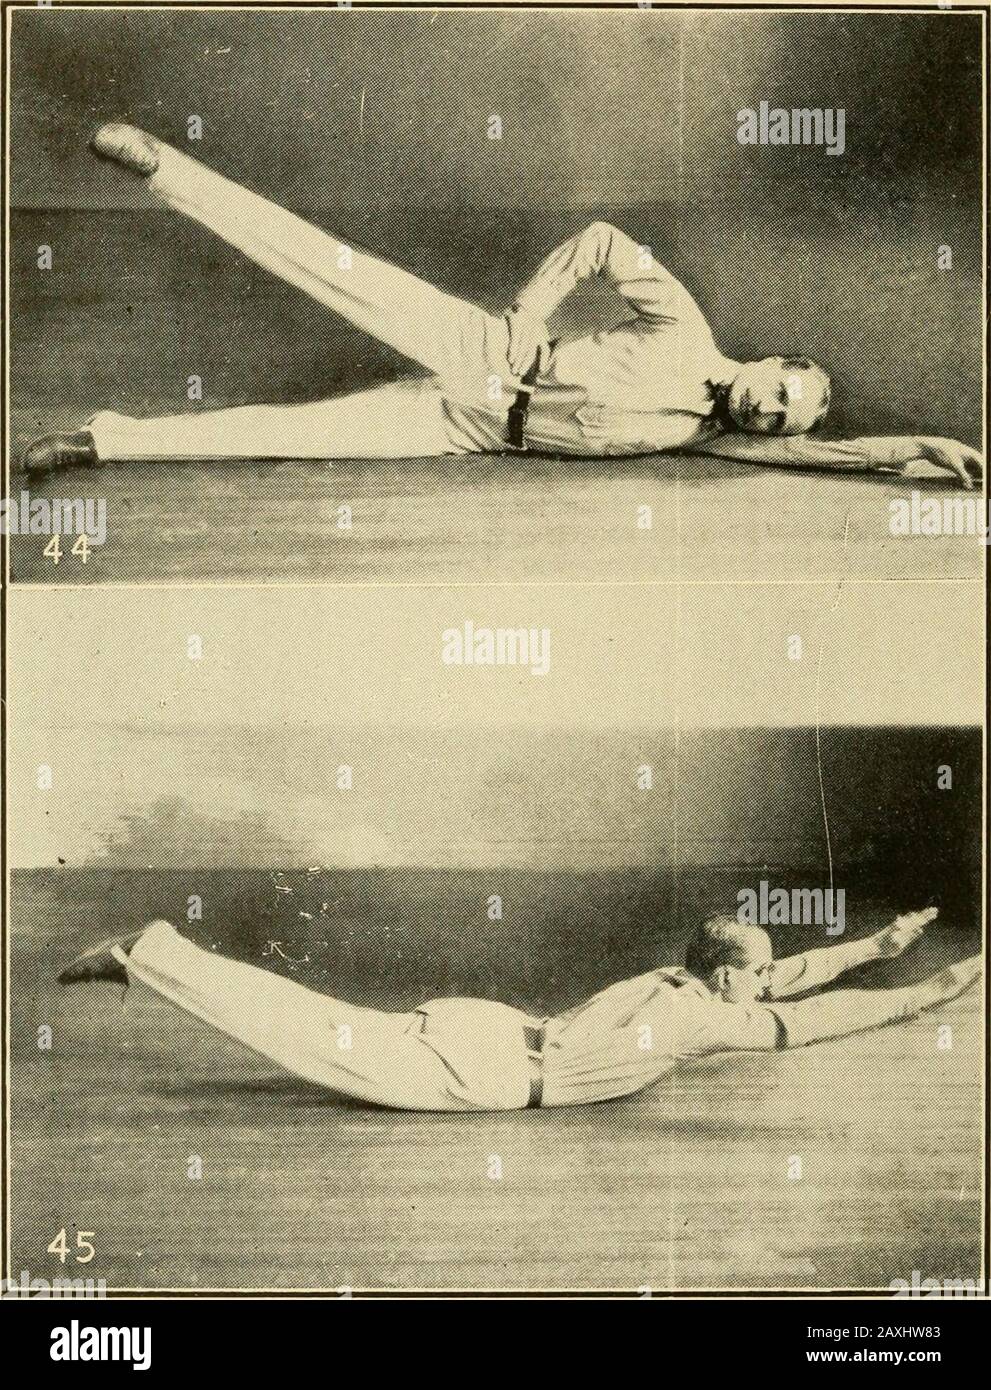 Graded calisthenic and dumb bell drills . posi tions. (a) In the stand. (b) In the stride-stand ^ 2. Arm movements.(Fig. 31). I 3. Leg movements. ^4. Arm and leg movements 6. Arch bend (backward), (a) In the walk-stand j(Fig. 2). I I. Arms held in various posi (b) From stand with leg movements. tions.2. Arm movements. L II. EXERCISES OF THE LOWER EXTREMITIES. 1. Charge (or lunge), Fig. 7. (a) Forward. (b) Forward oblique. (c) Side. (d) Rear obli&lt;iue. (e) Rear. (f) Cross. 1. Arms held in various posi-tions. 2. Arm movements. 3. Body movements. 4. Arm and body movements. 2. Leg movements in t Stock Photo